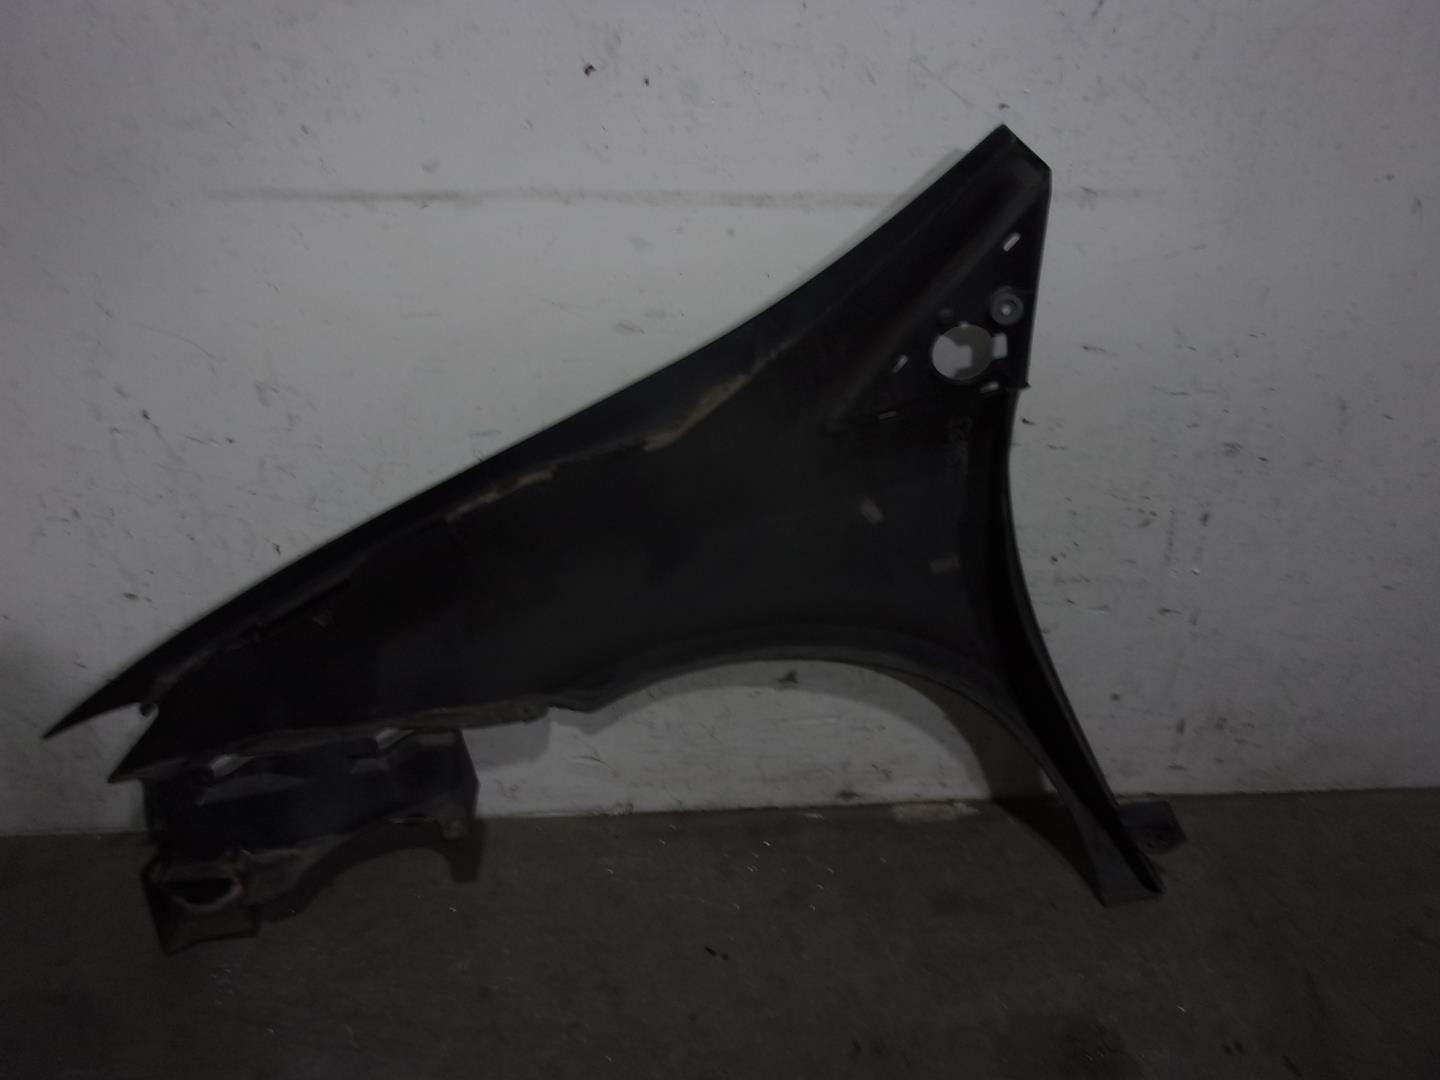 LANCIA Phedra 2 generation (2002-2008) Front Right Fender 1493182088, GRISOSCURO 24227253